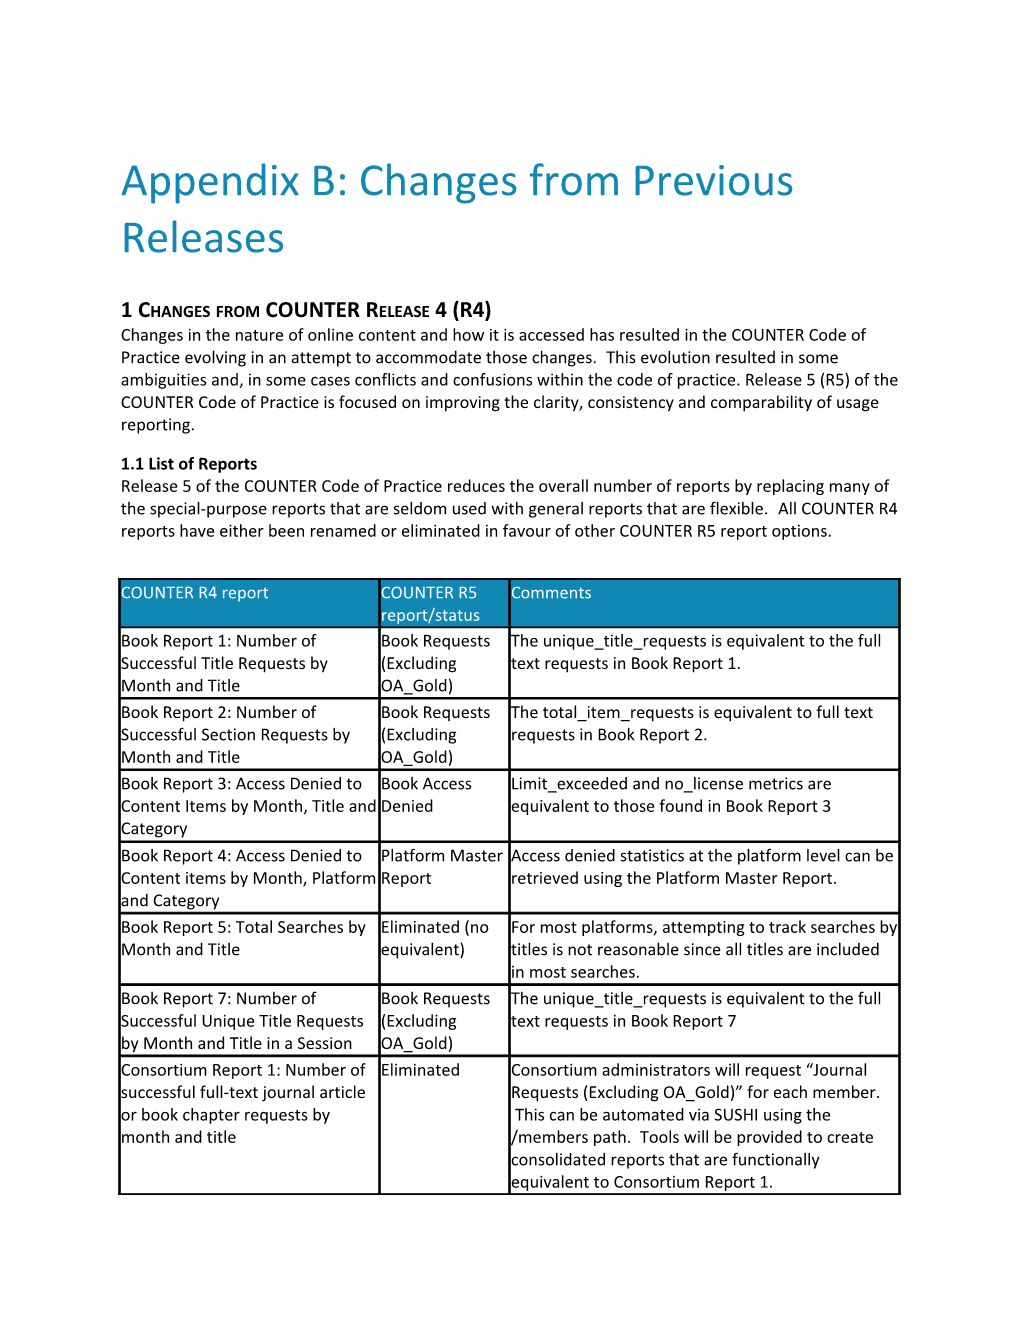 Appendix B: Changes from Previous Releases